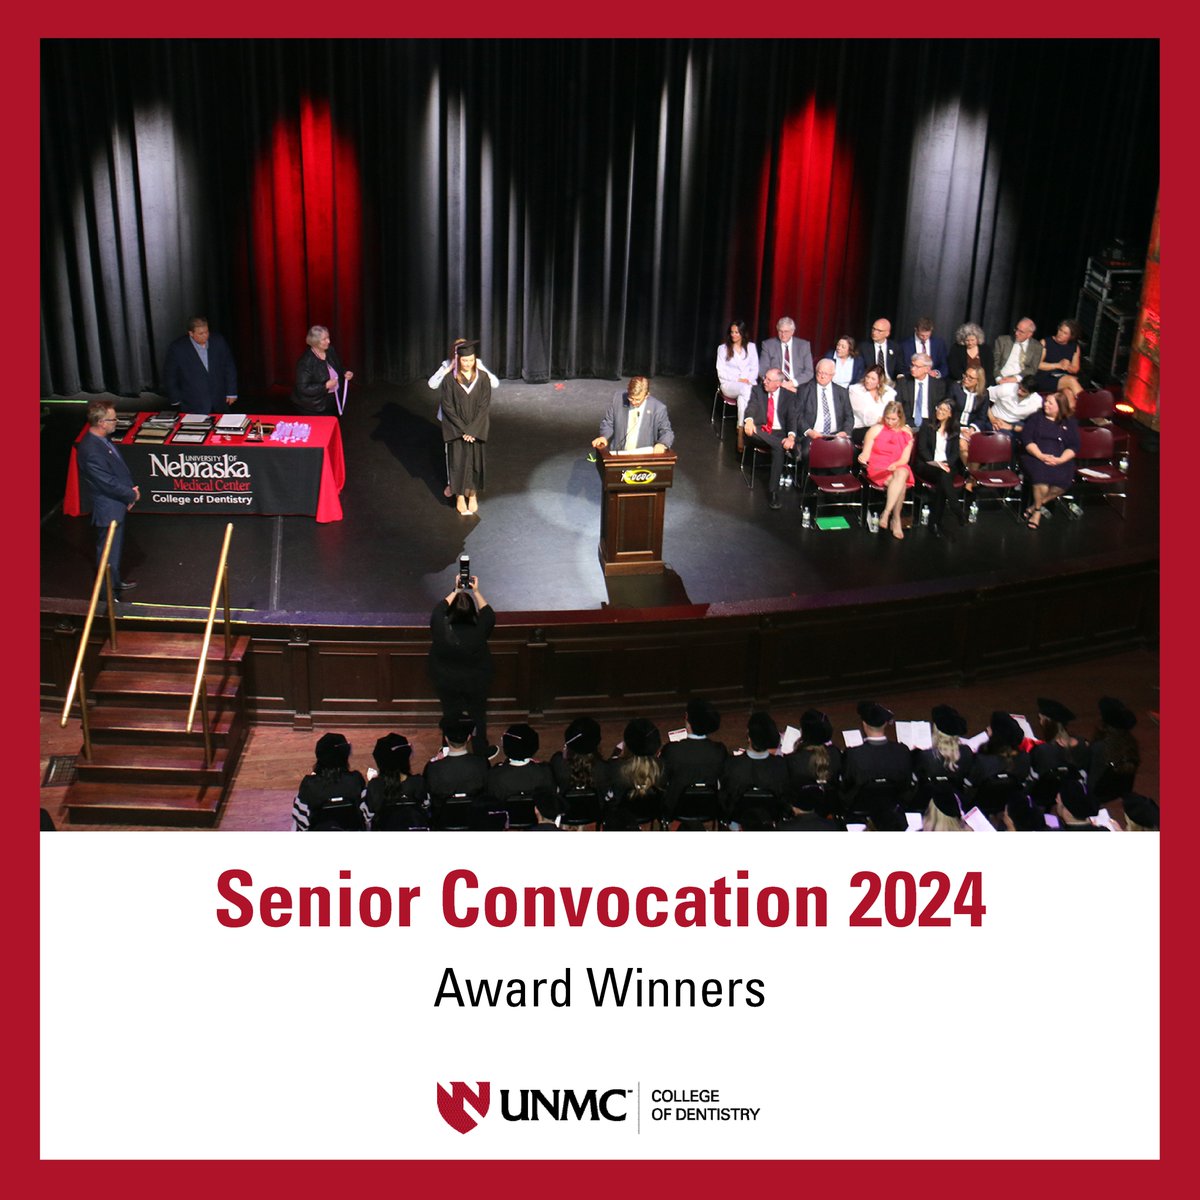 The College of Dentistry’s Senior Convocation was held on May 1 at the Rococo Theatre. We congratulate the dental & dental hygiene seniors who were recognized. Their pursuit of excellence lead to extraordinary achievements. See award winners: bit.ly/3JJVAJU #iamunmc